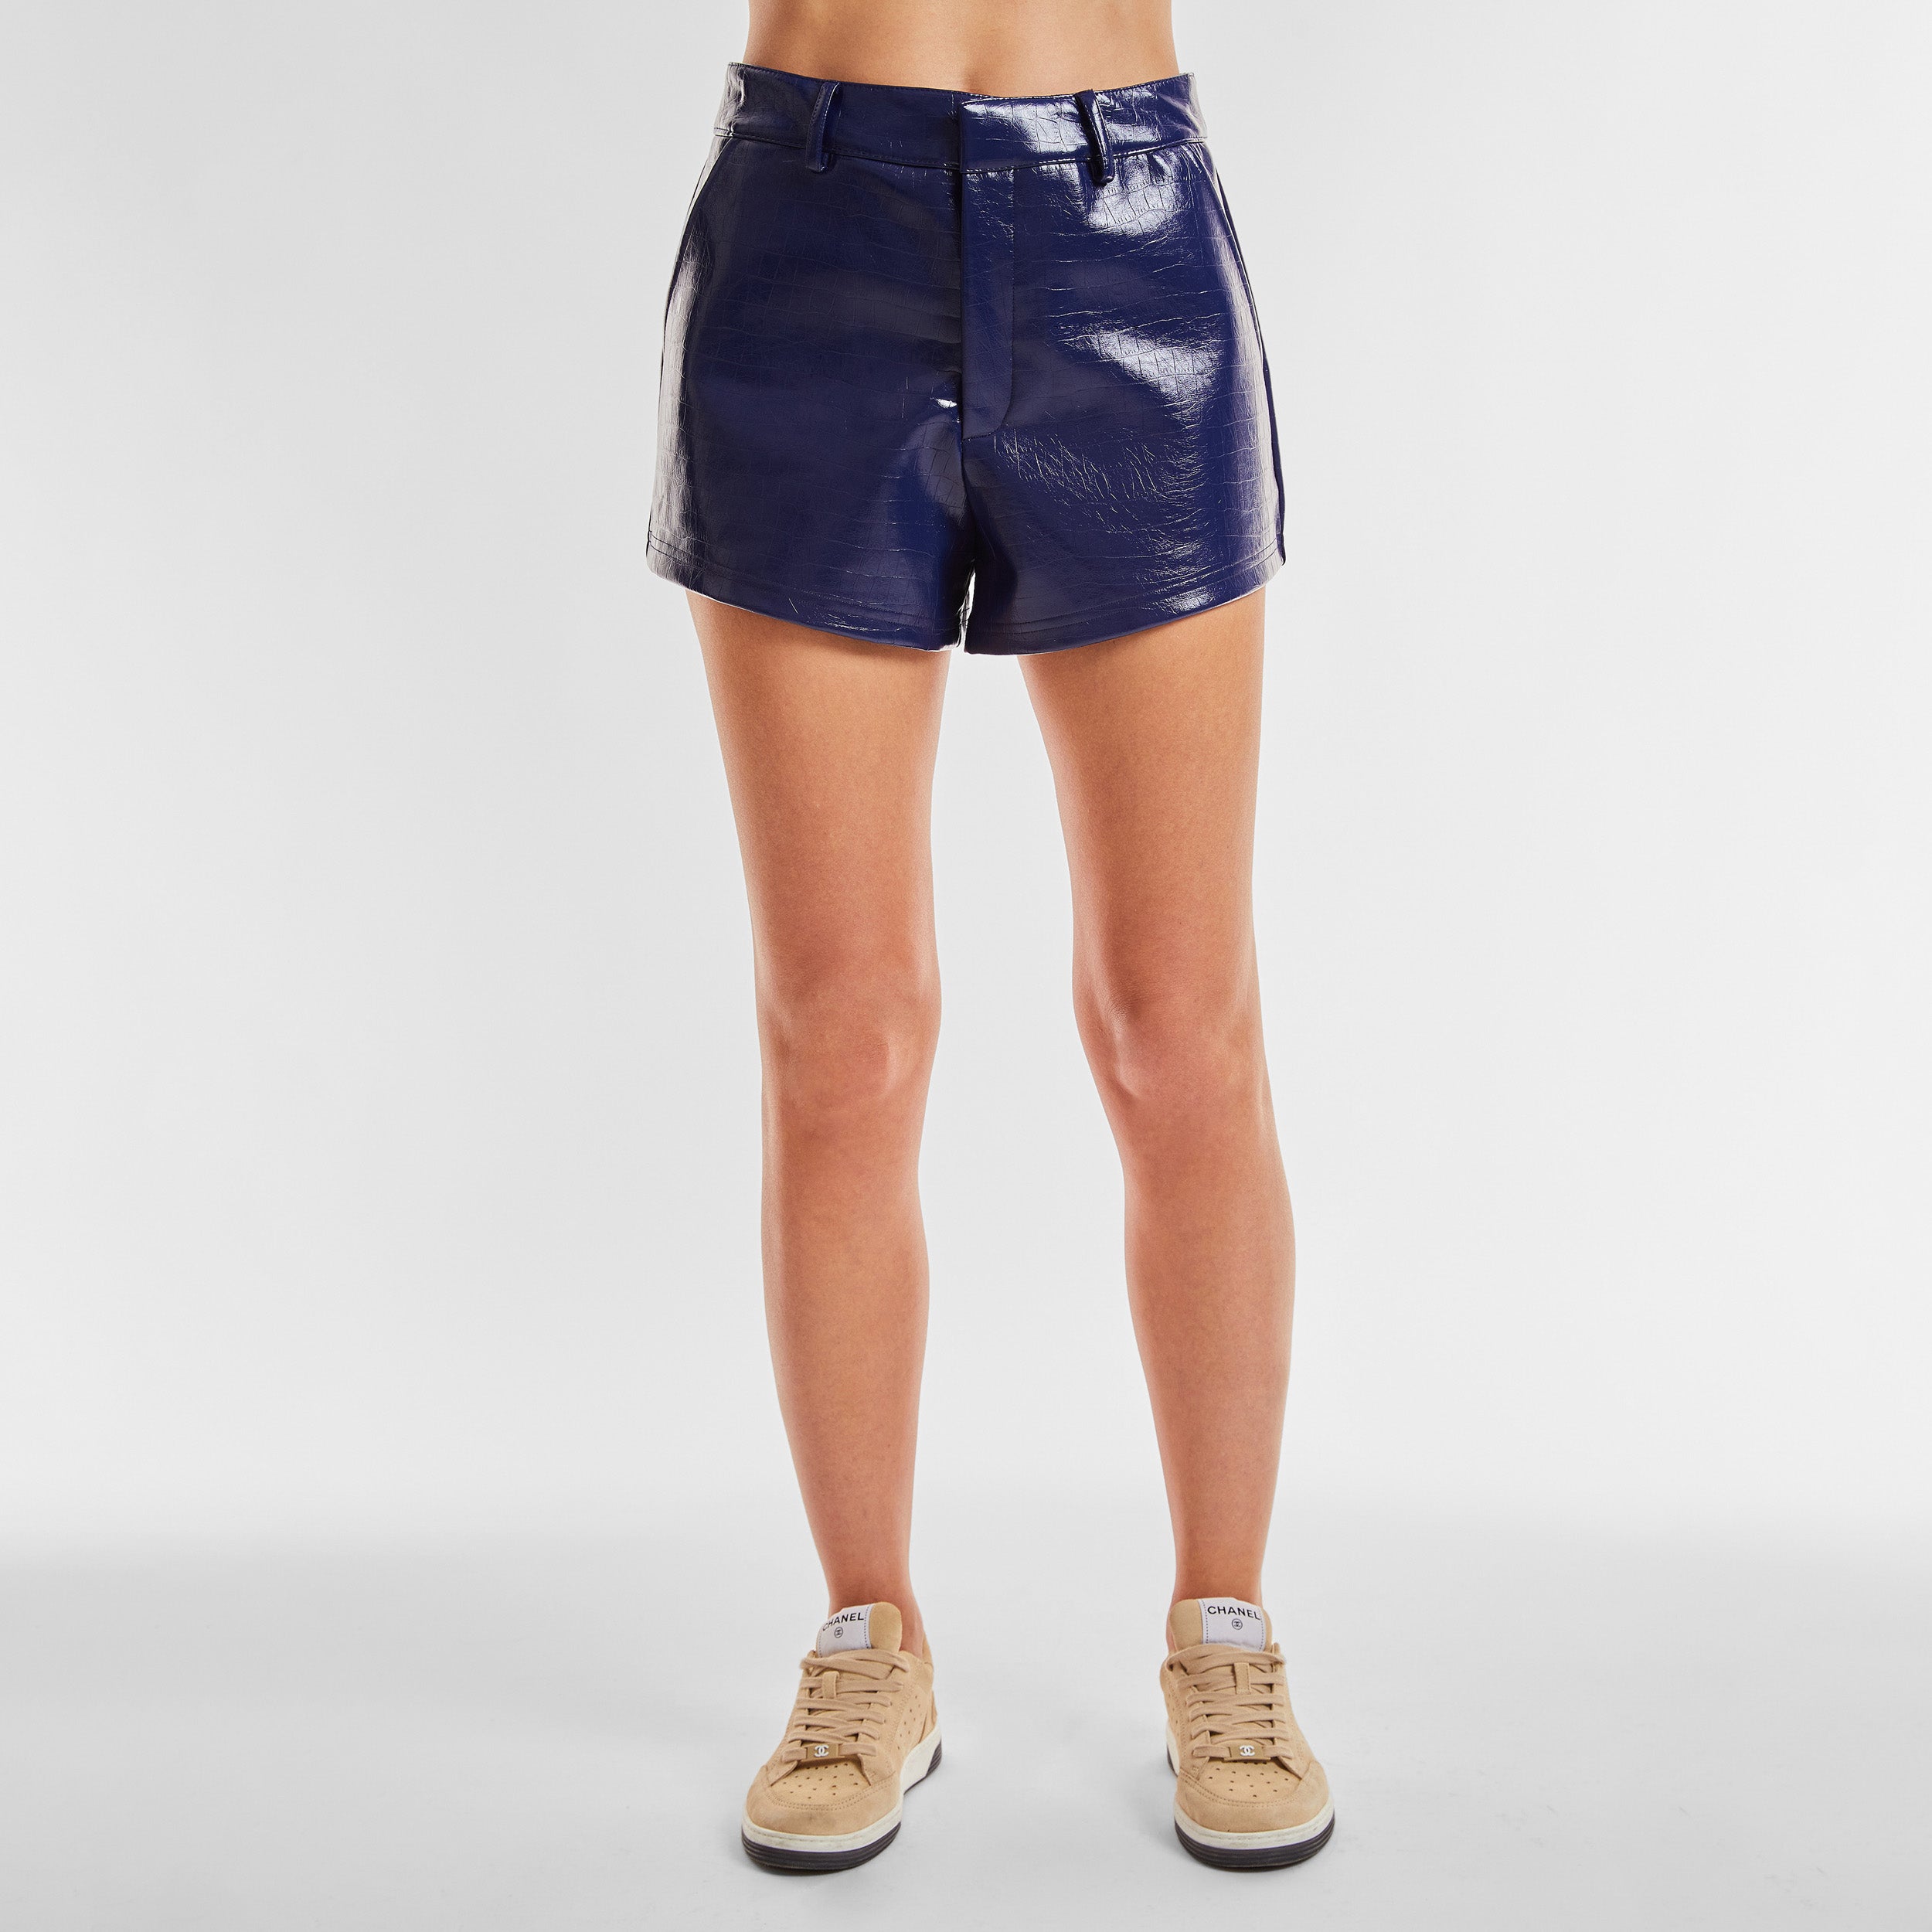 Front view of woman wearing blue faux leather short with croco embossed pattern.